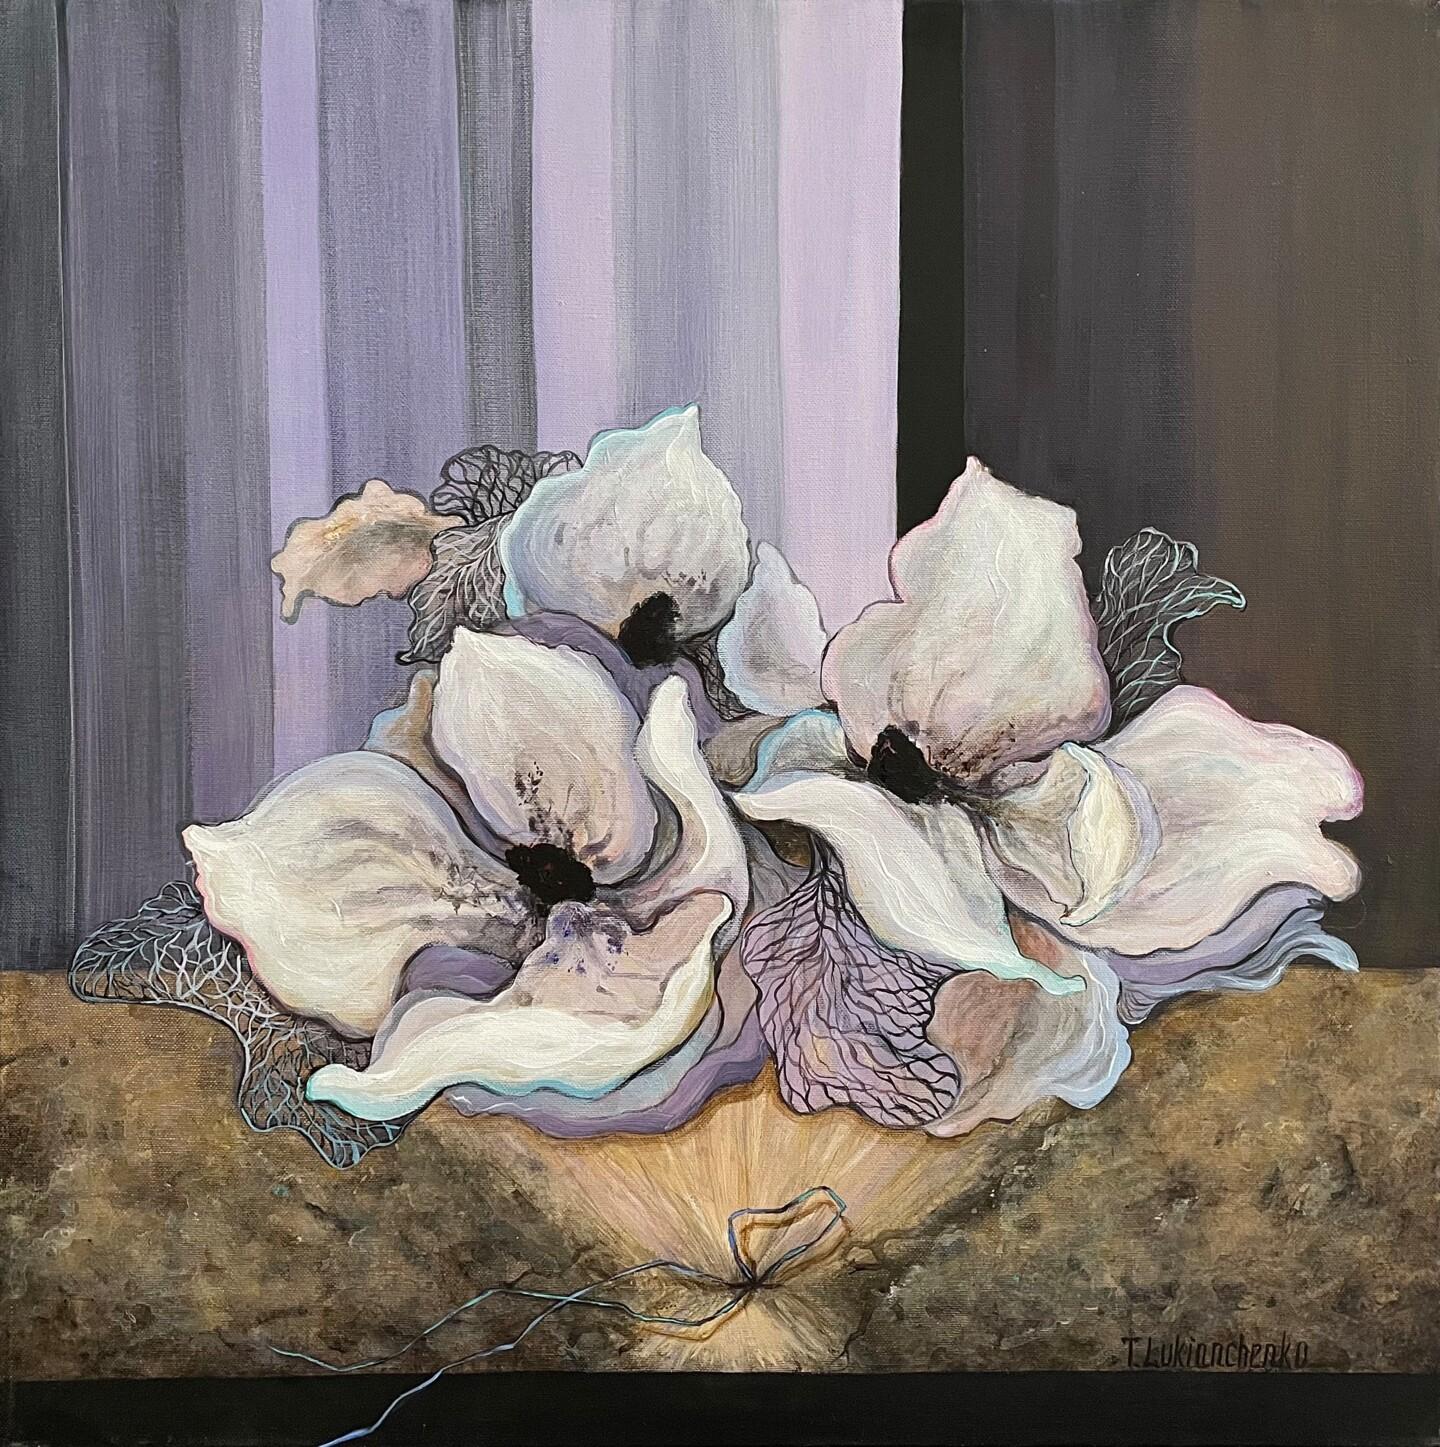 Unknown Still-Life Painting - Winter Flowers, Acrylic Painting by Tetiana Lukianchenko, 2020